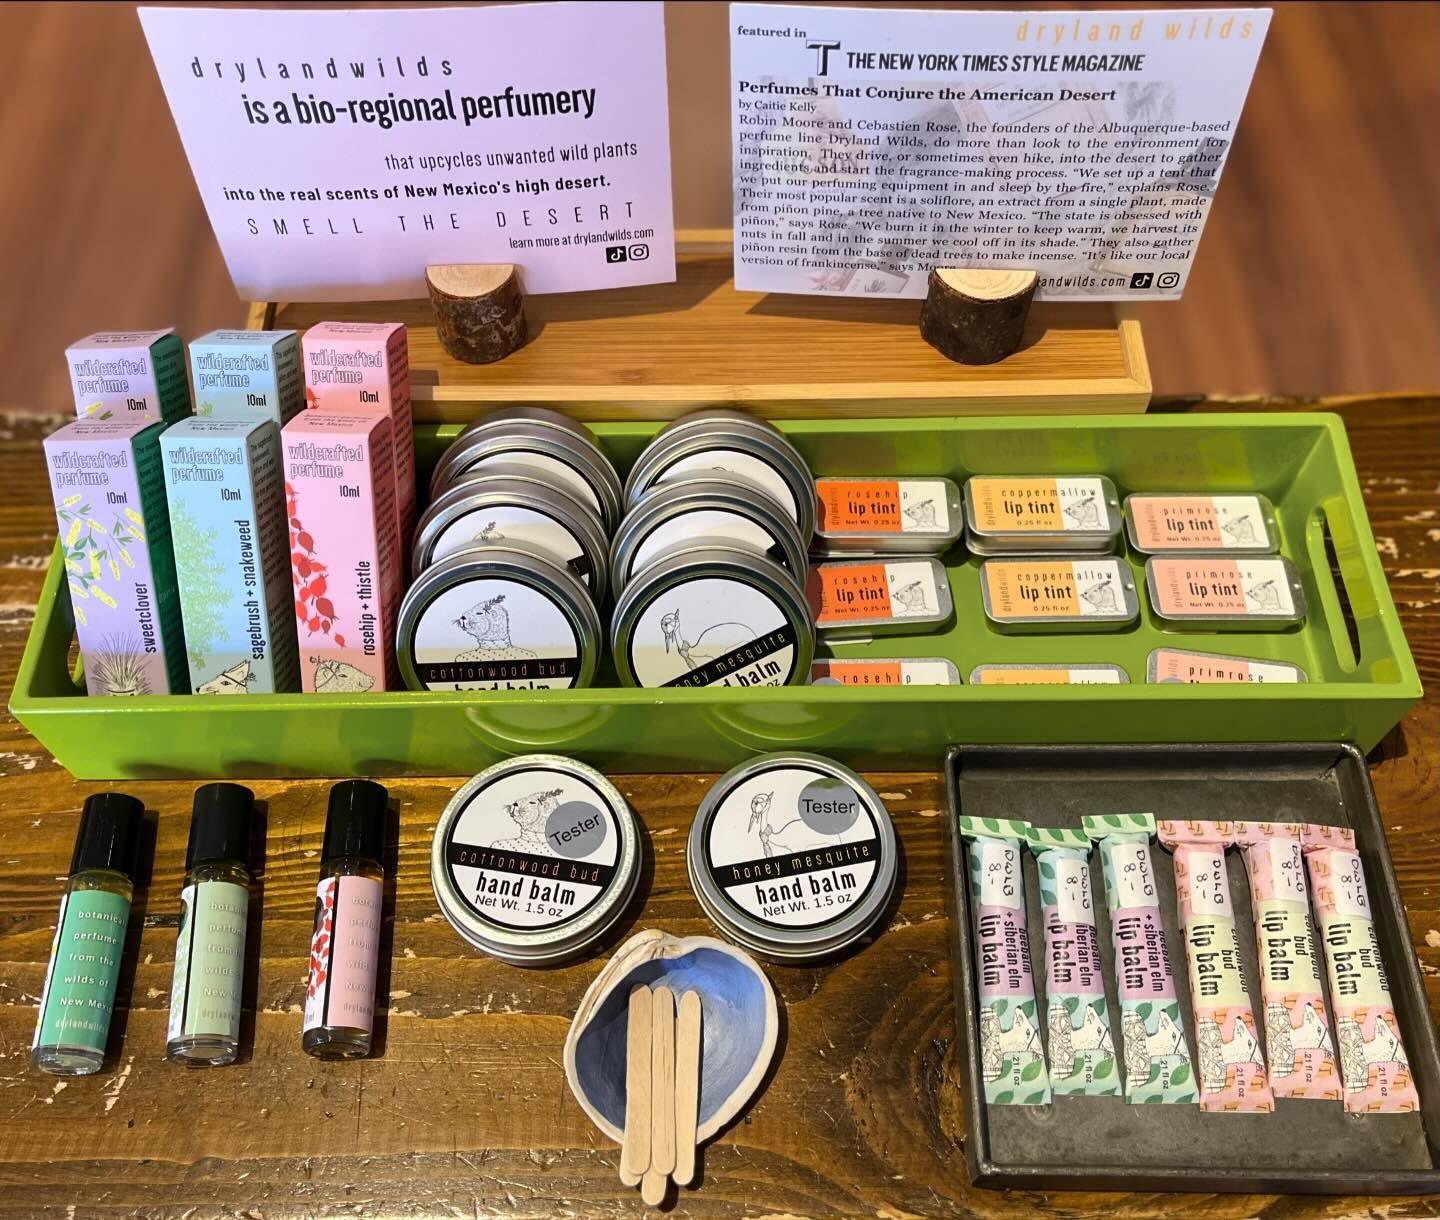 We are excited to offer Dryland Wilds handcrafted desert perfumes, hand balms and lip balms! They harvest dryland plants from NM to make their artisanal desert perfumes, practicing sustainable wild crafting! #newarrivals #drylandwilds #desertperfume 